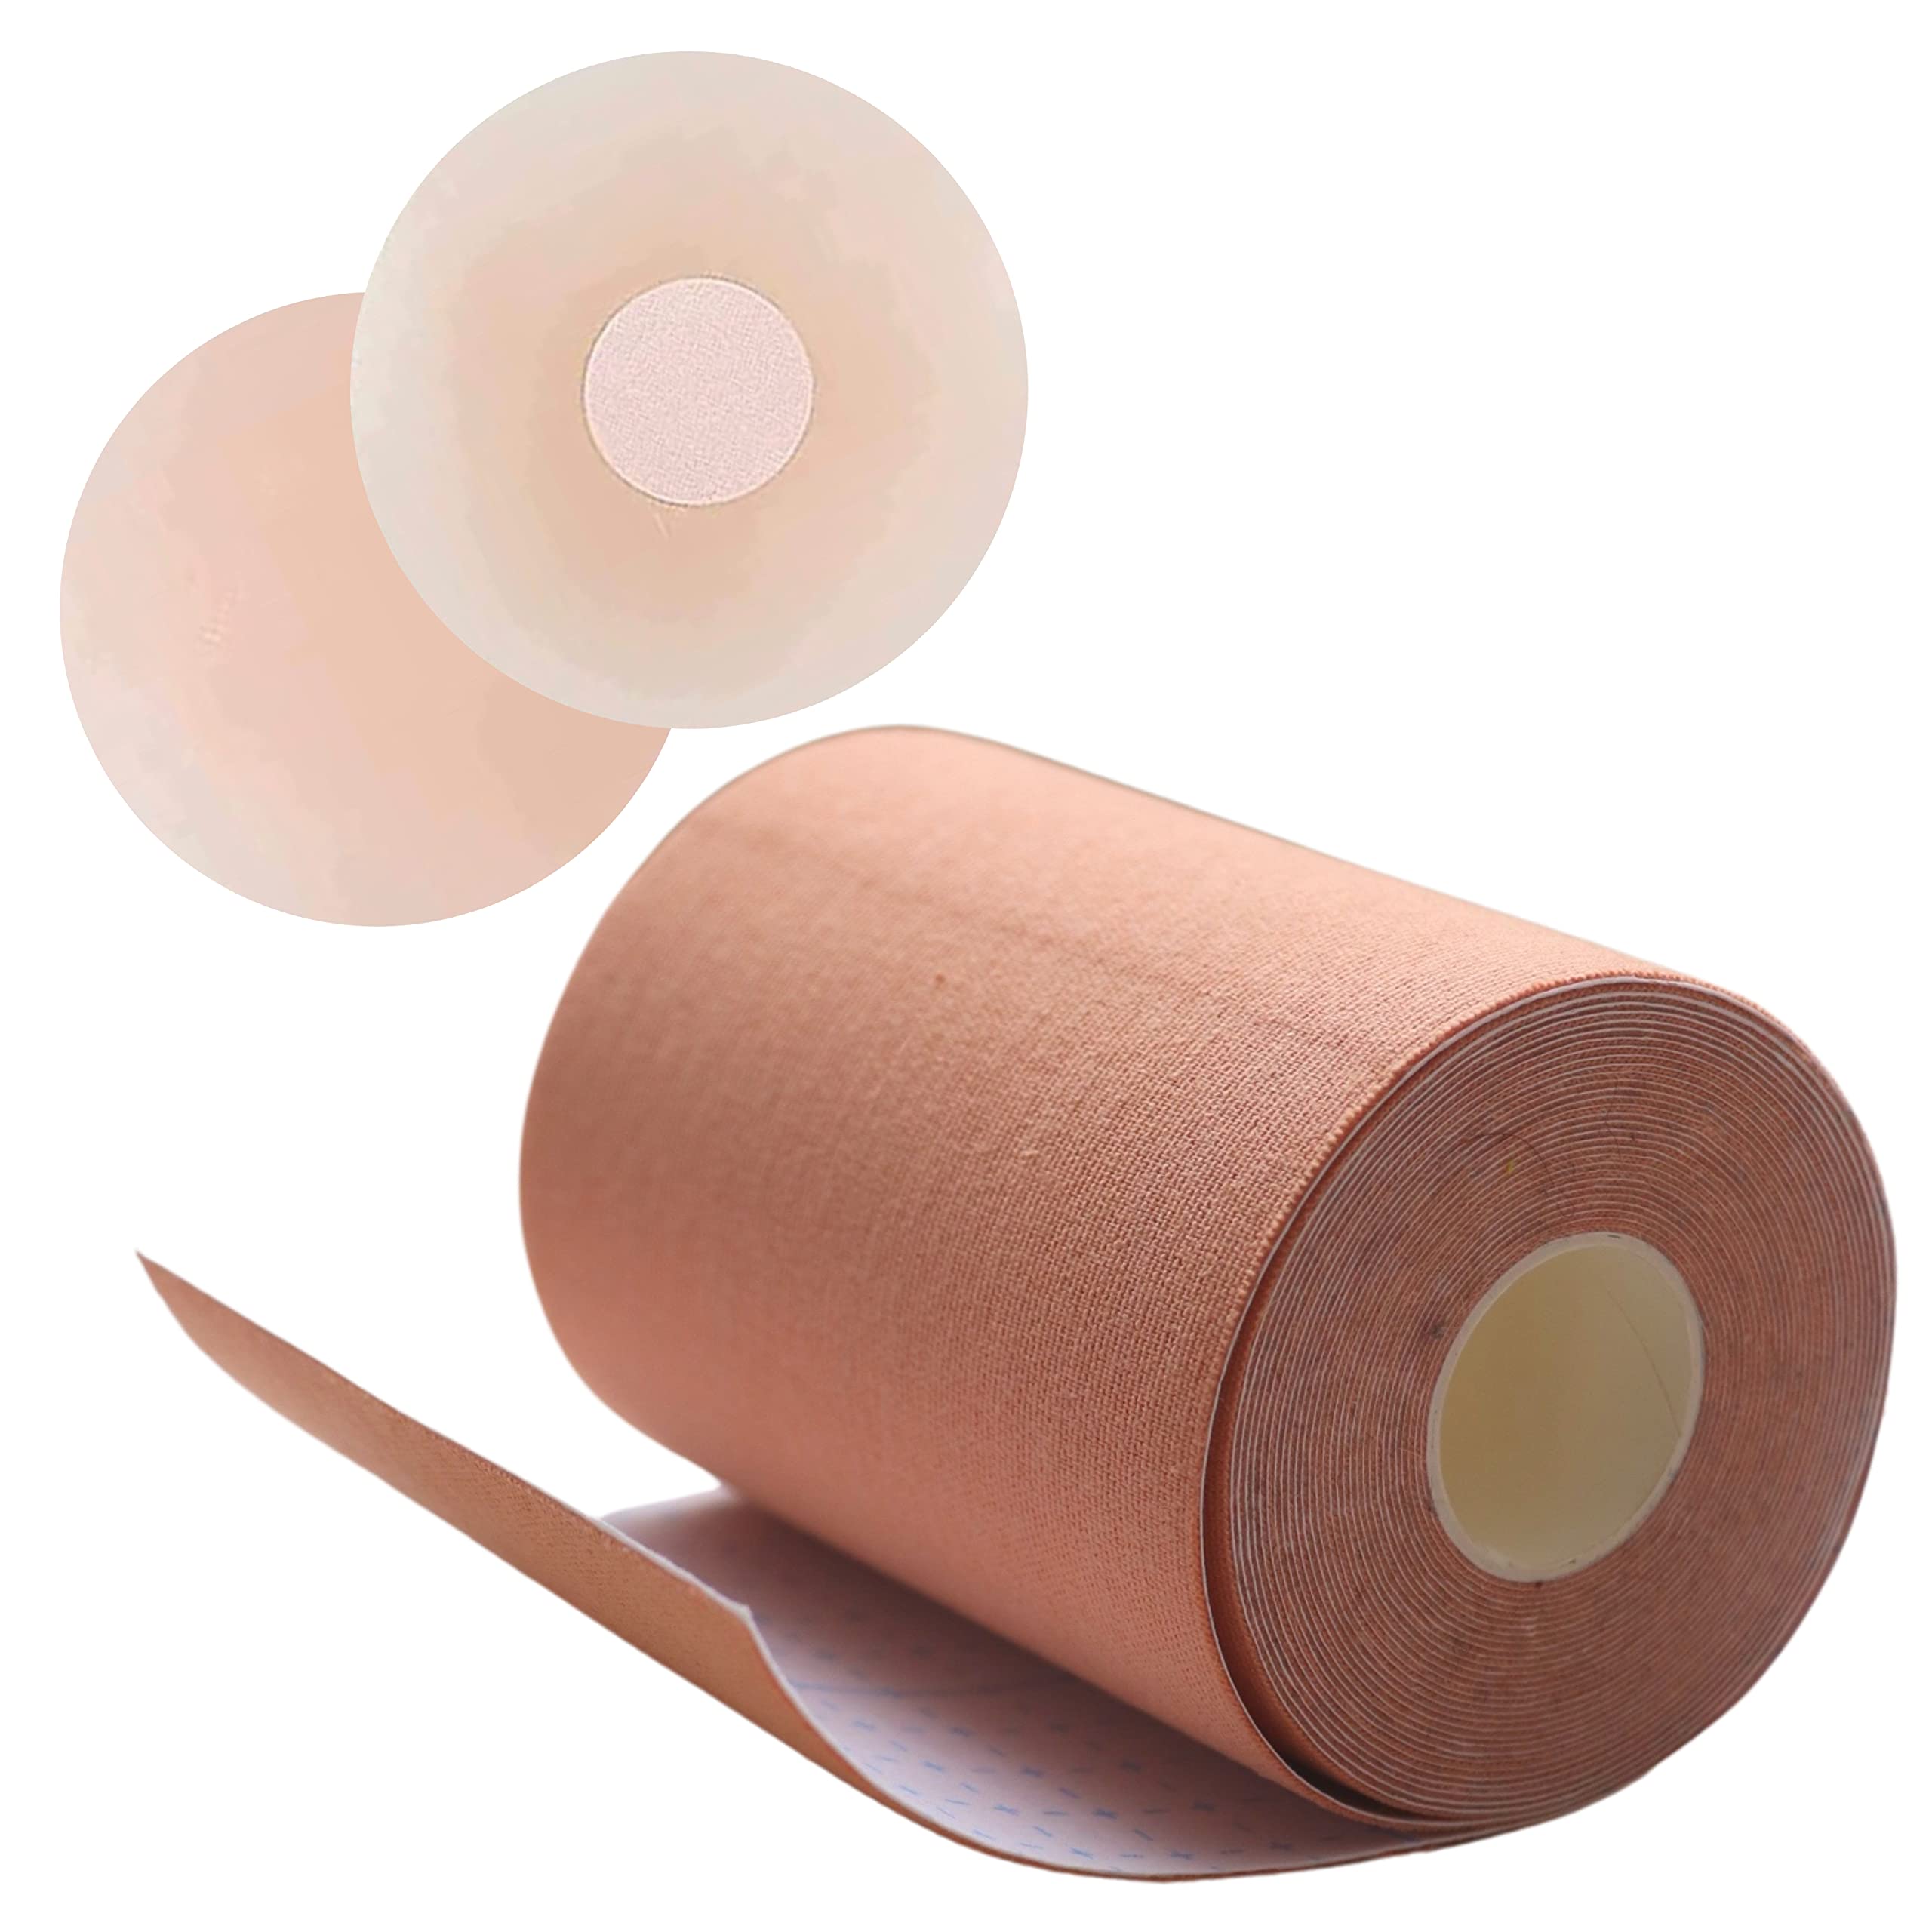 Boob Tape, Boobytape for Breast Lift, Bob Tape Large Breast, Large, Beige